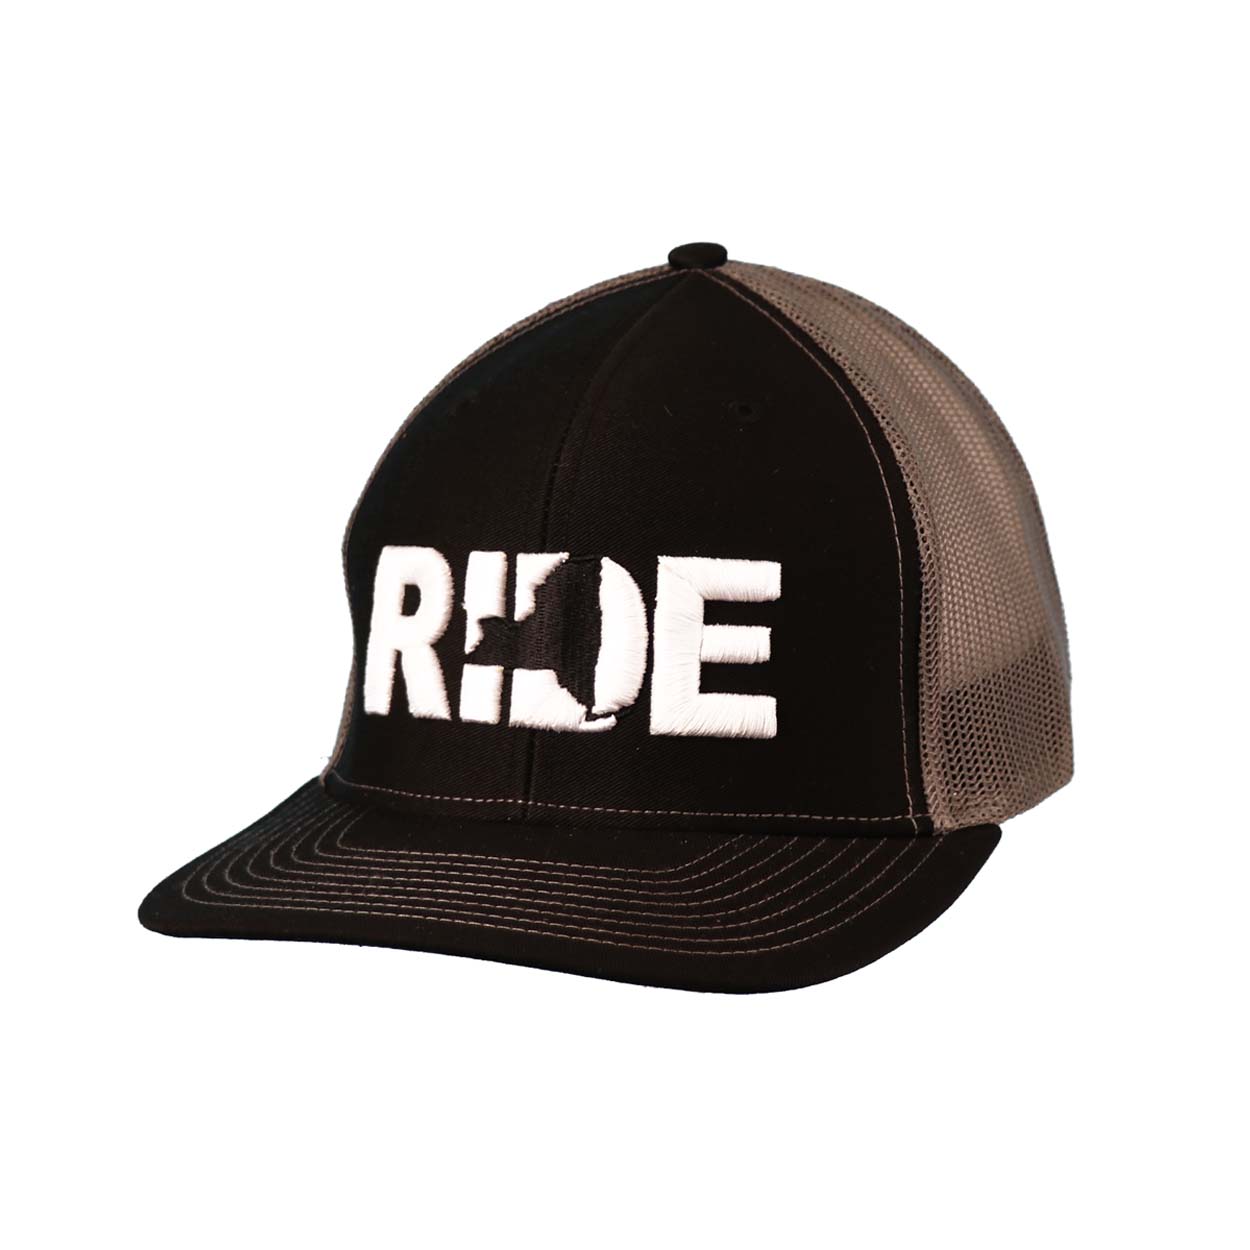 Ride New York Classic Embroidered Snapback Trucker Hat Black/Charcoal